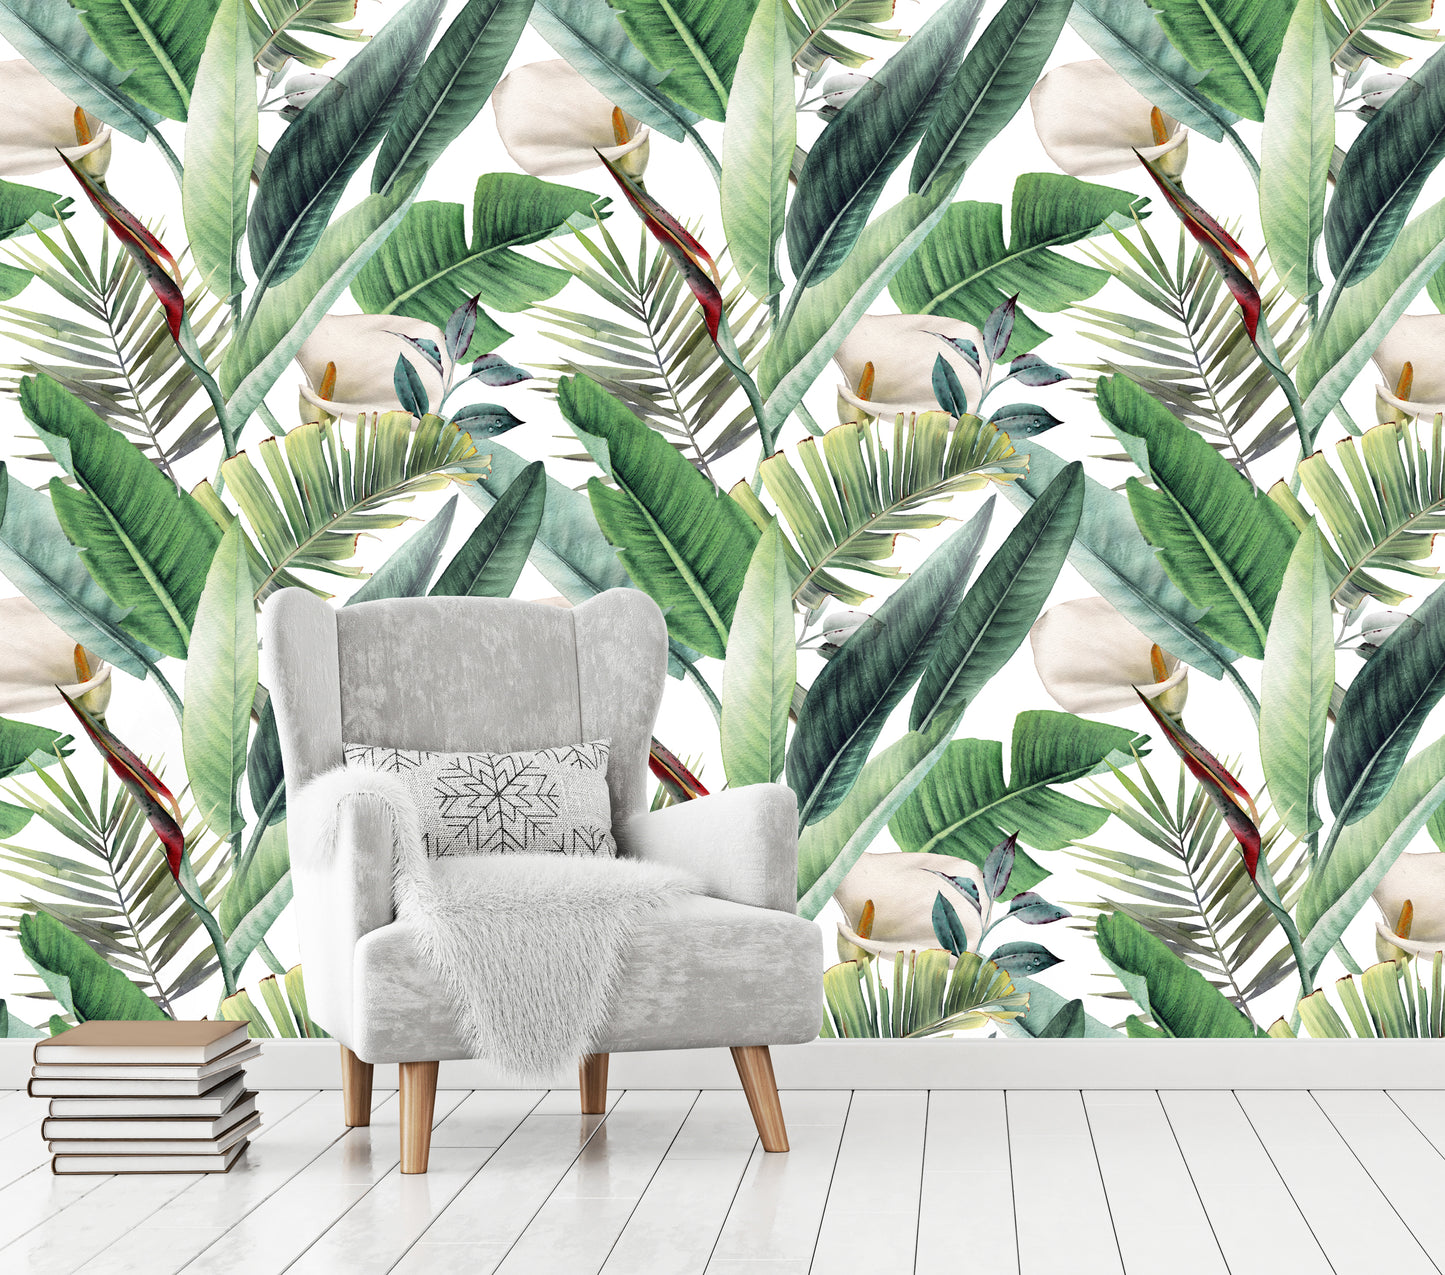 Arum-lily - Full Wall Mural